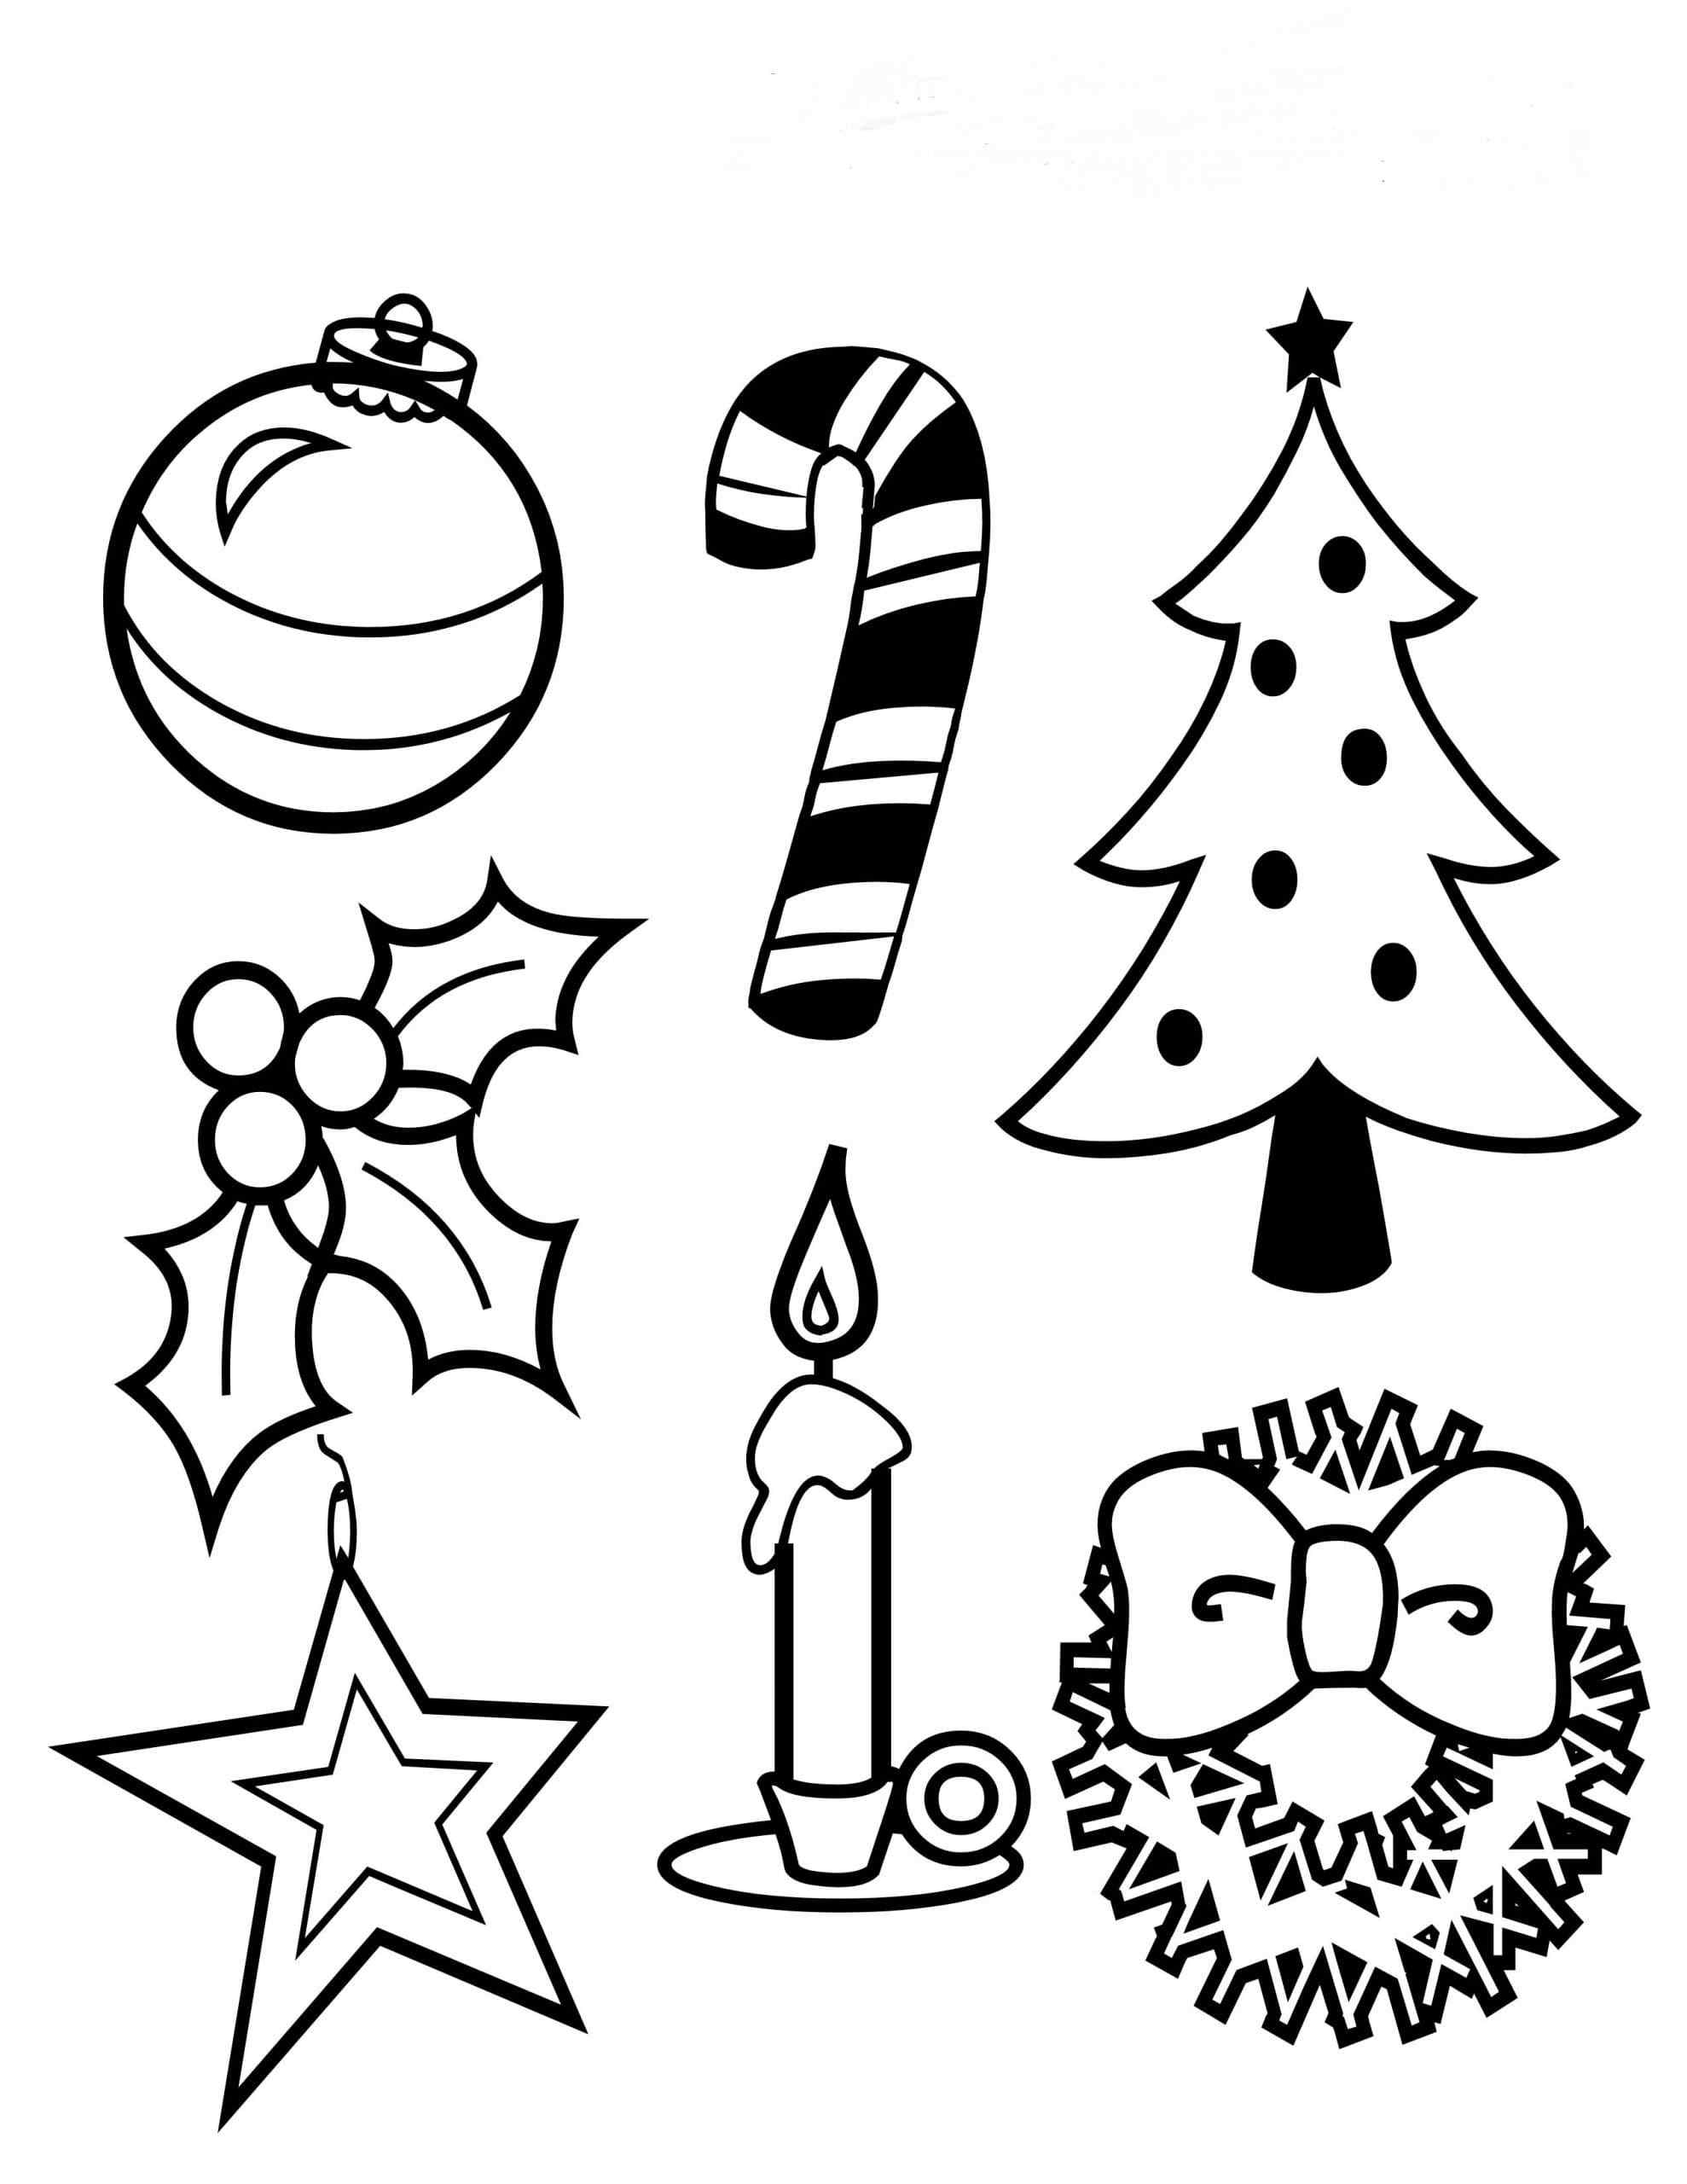 The Main Attributes Of Christmas Coloring Page